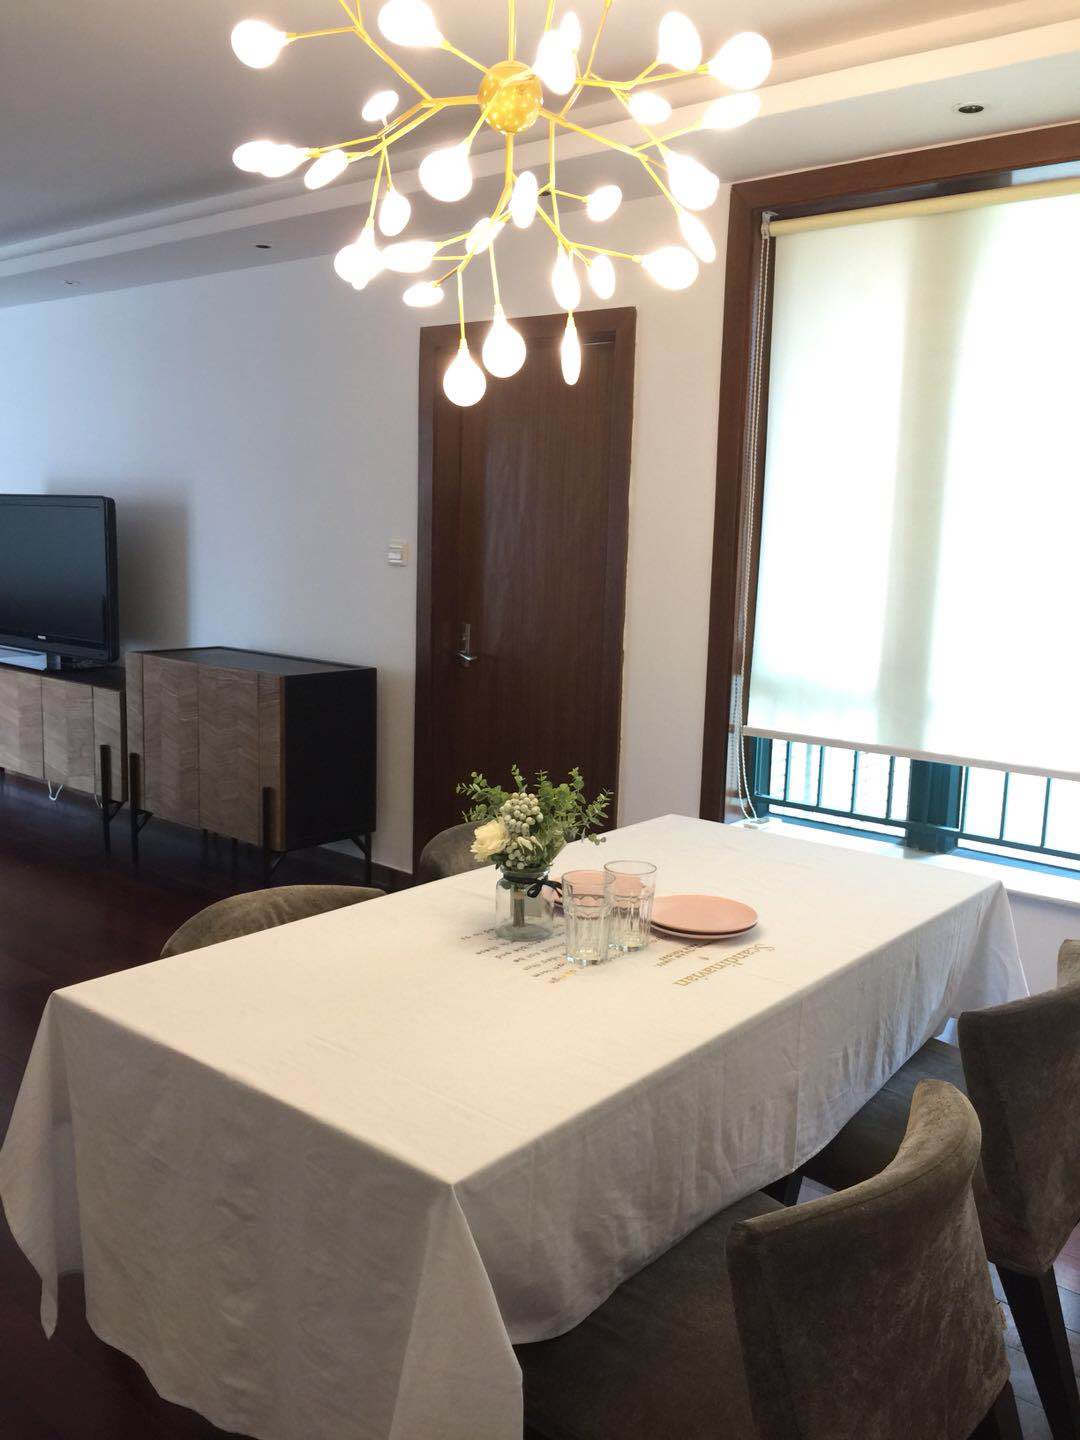  Renovated 3BR Apartment in Good Compound in Xujiahui CBD